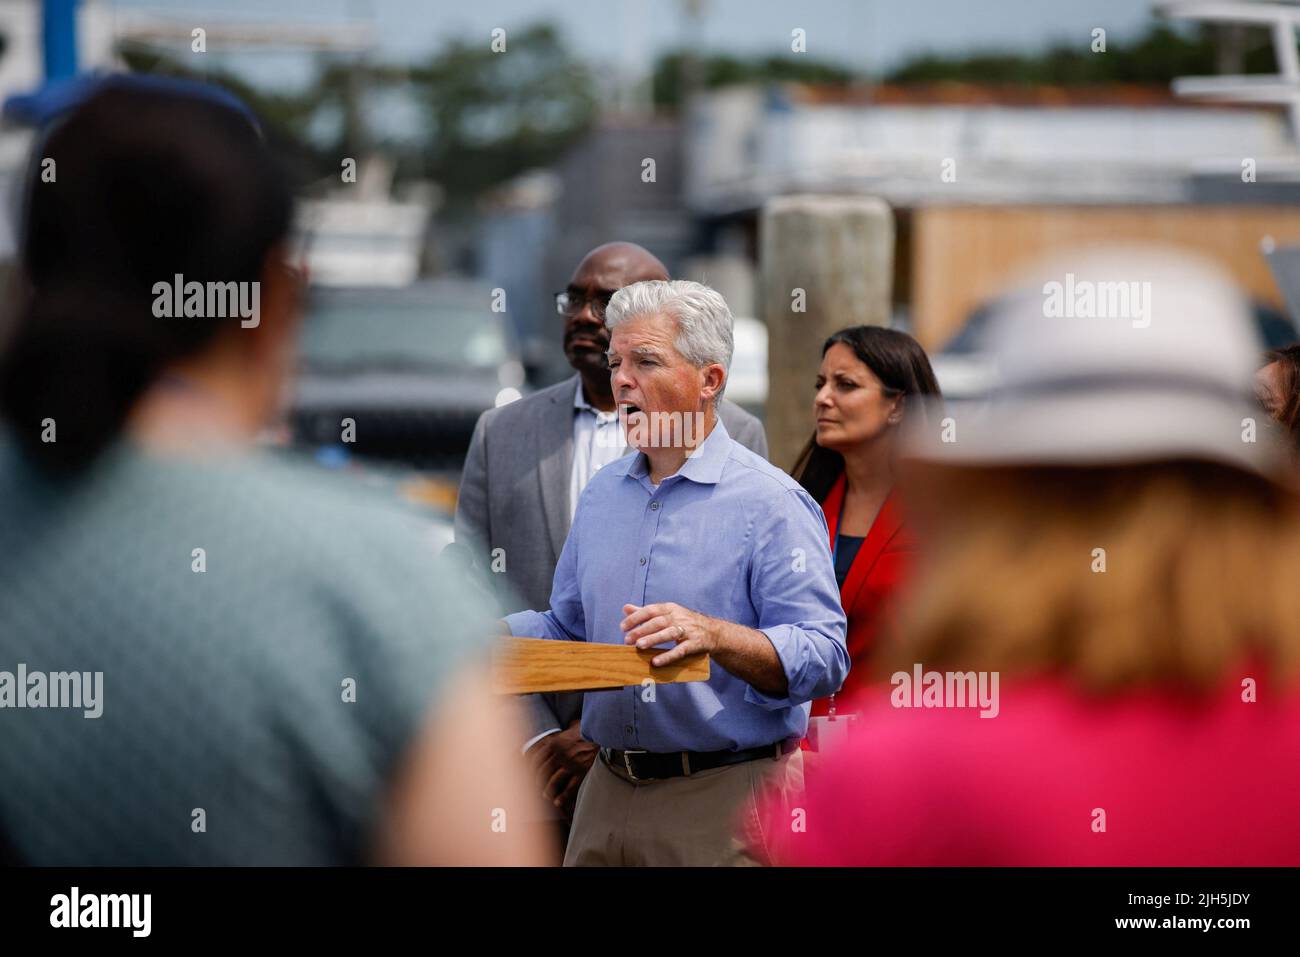 Suffolk County Executive Steve Bellone speaks during a news conference about monkeypox vaccinations in Sayville, New York, U.S., July 15, 2022. REUTERS/Eduardo Munoz Stock Photo